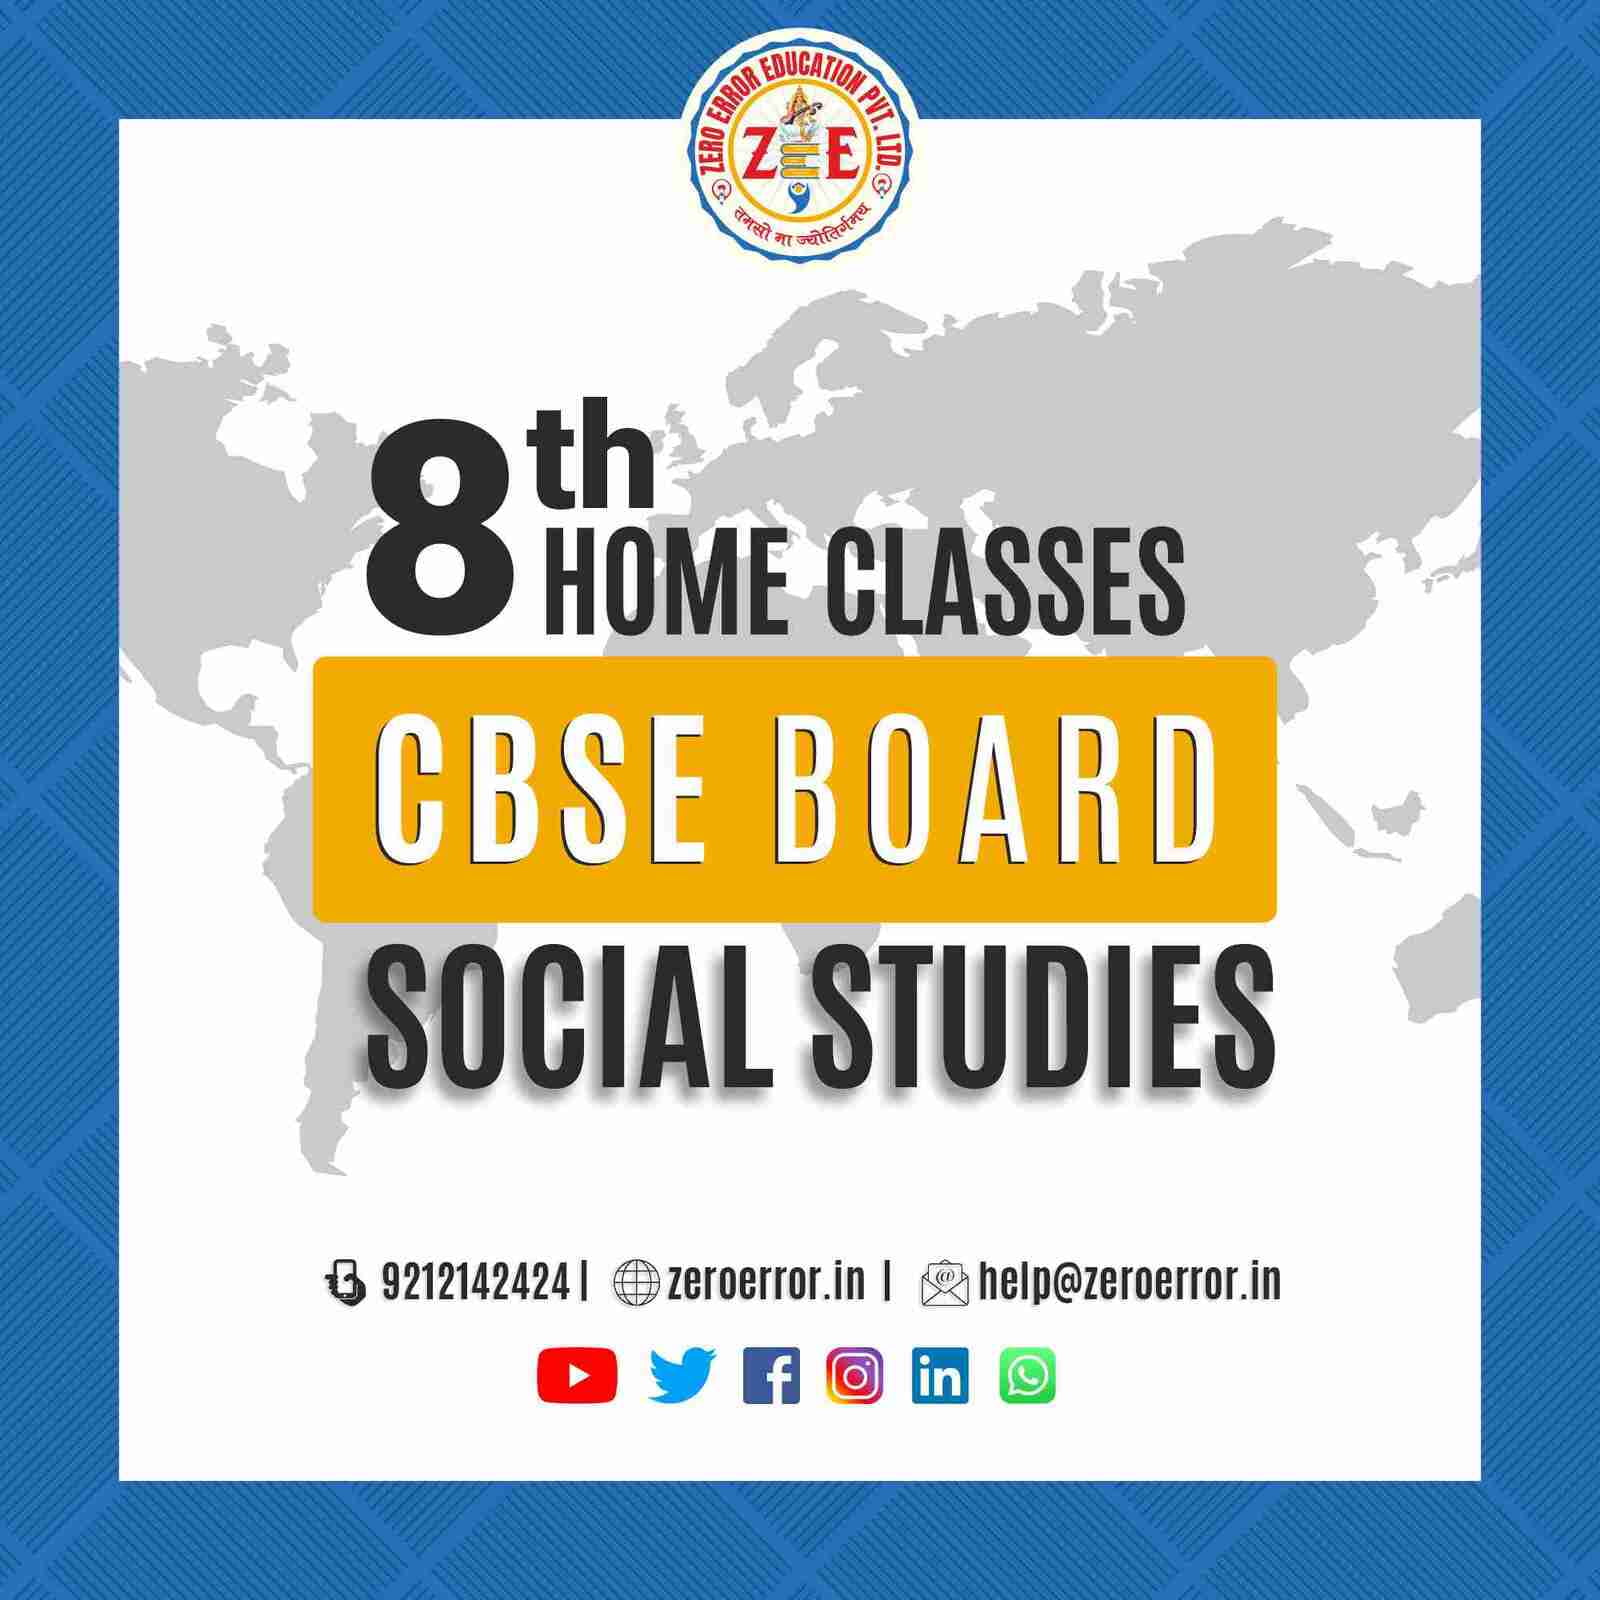 8th Grade CBSE Social Science Online Classes by Zero Error Education Prepare for your CBSE board exams with online and offline SST classes for 8th grade. Learn from experienced home tutors and get all the help you need to succeed. Enroll today at Zero Error Education. [https://zeroerror.in/] Call 9212142424 for more information.